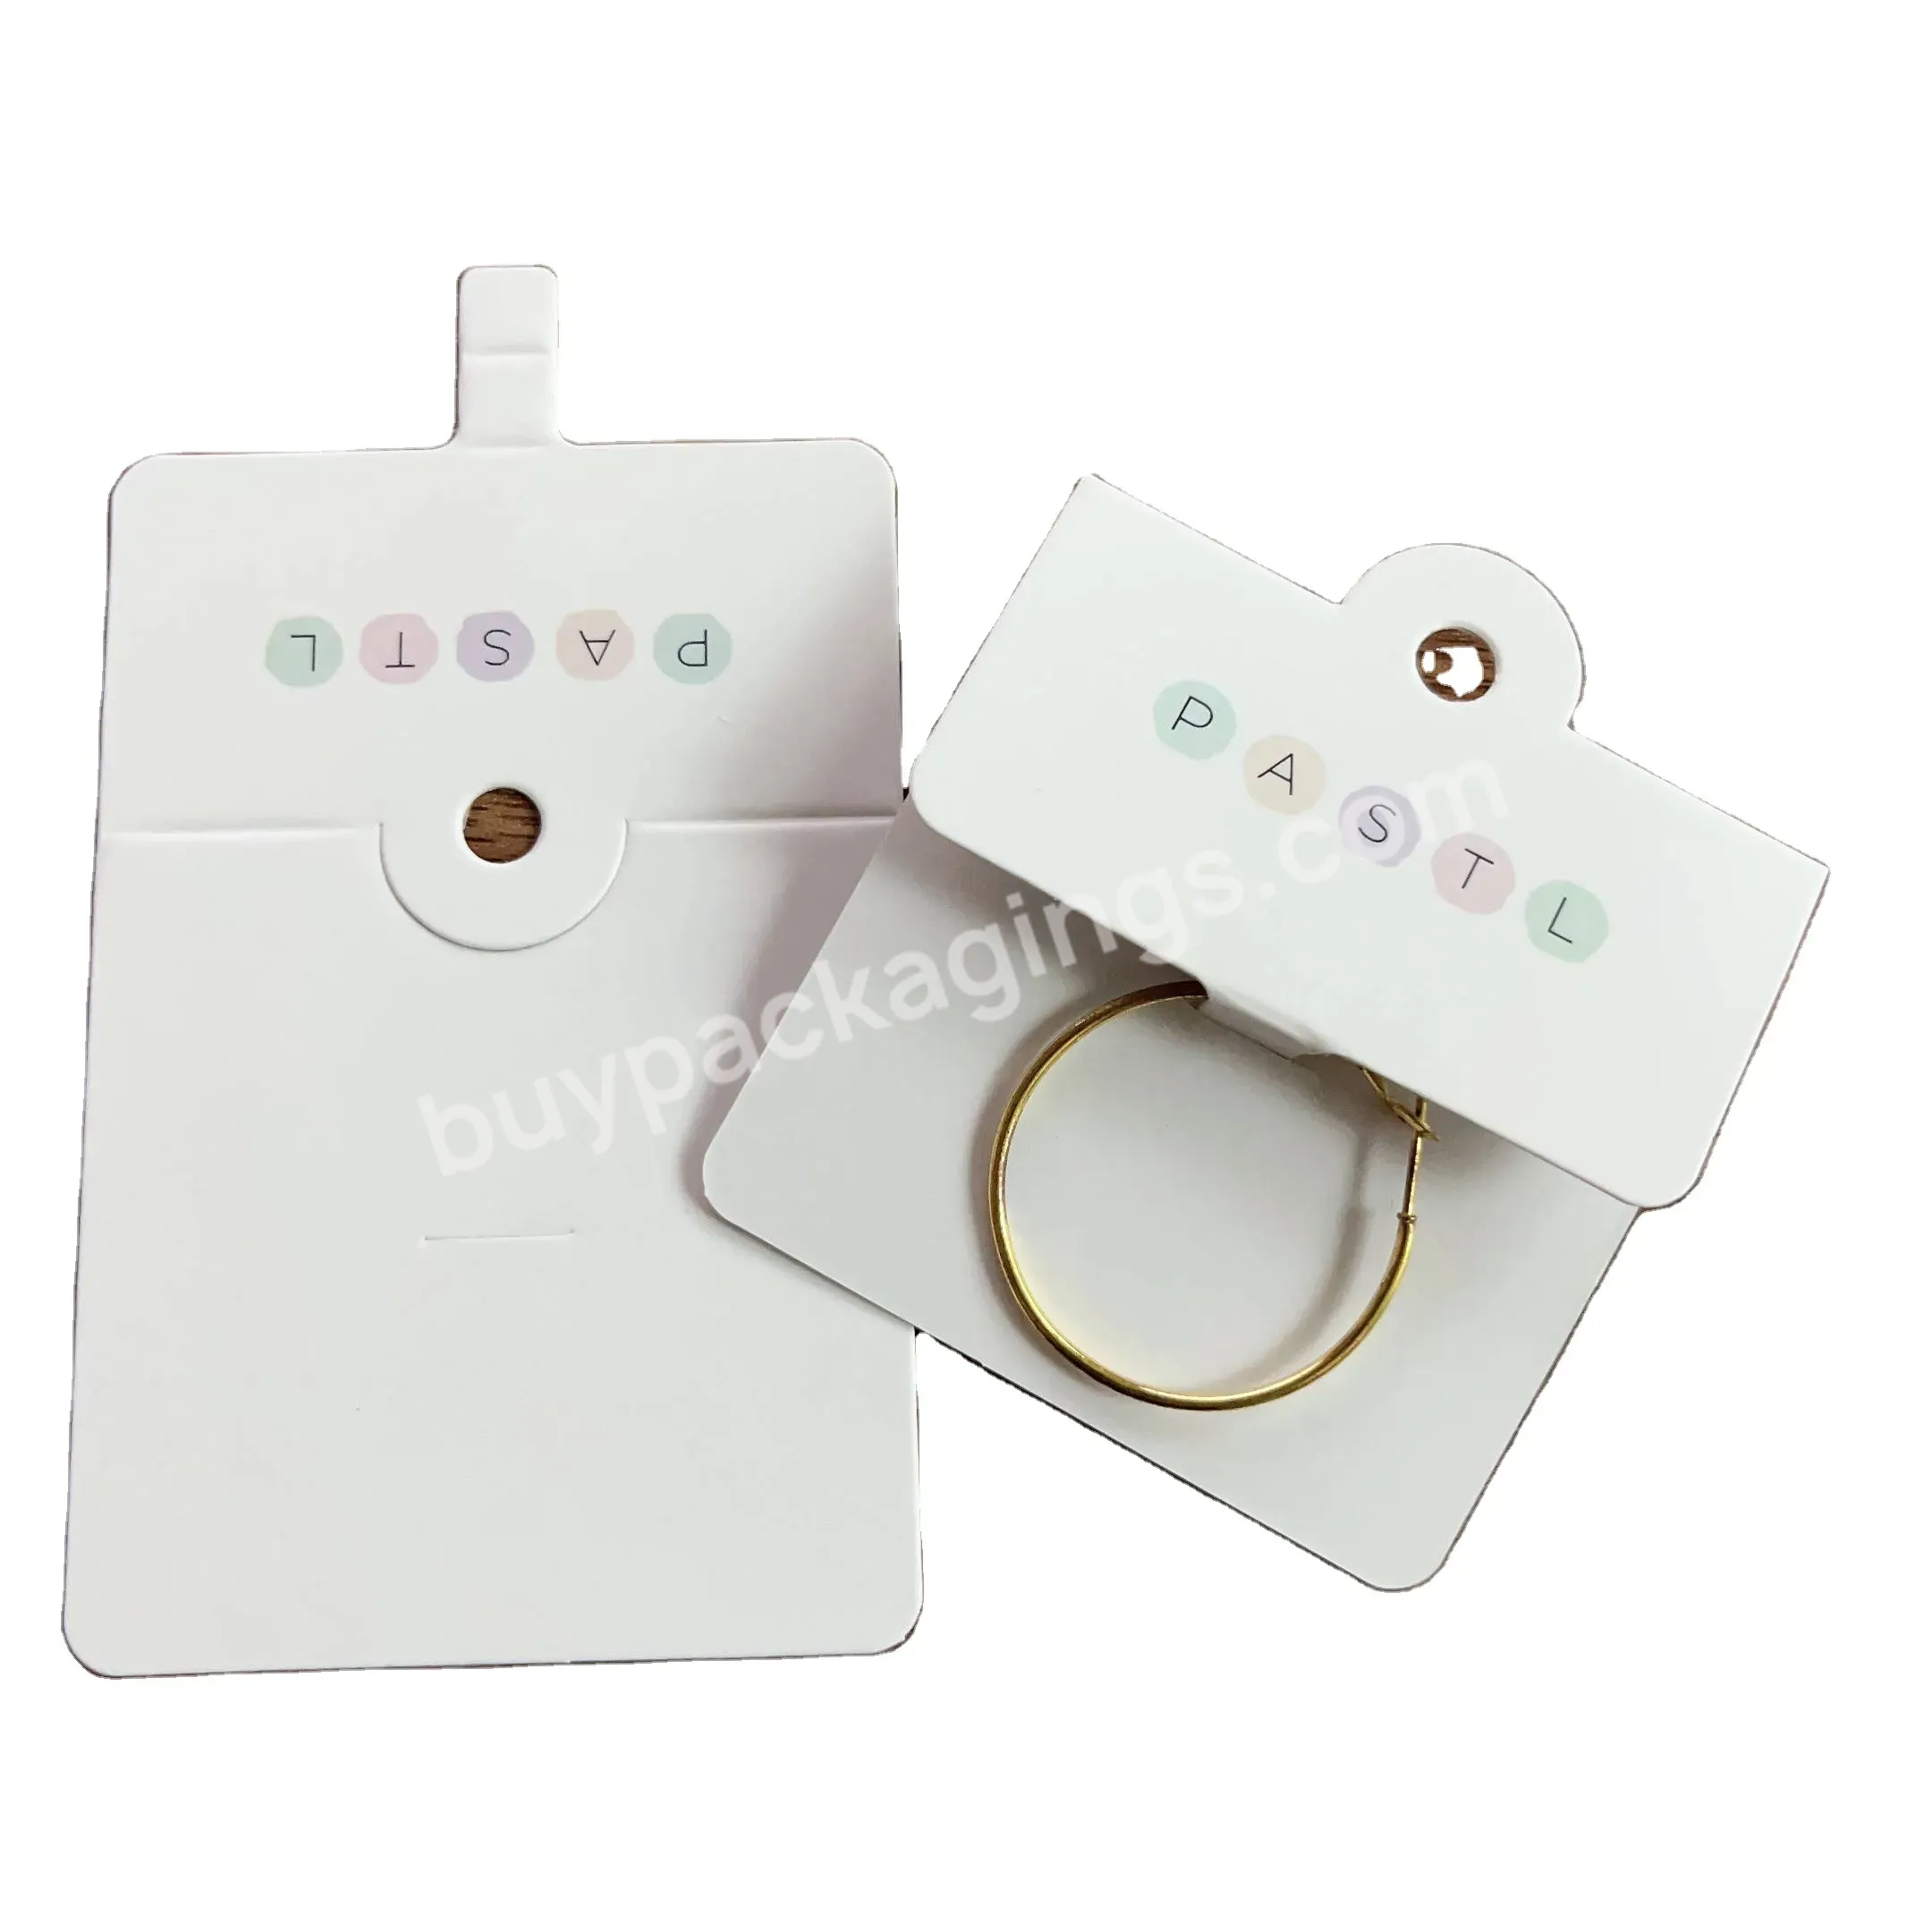 Wholesale Earrings Card Cat Cards Jewelry Display Packaging Earring And Ring Hangtag Hang Tags Cards Diy - Buy Jewelry Packaging Card,Earring And Ring Hangtag,Custom Jewelry Paper Hangtags With Logo.